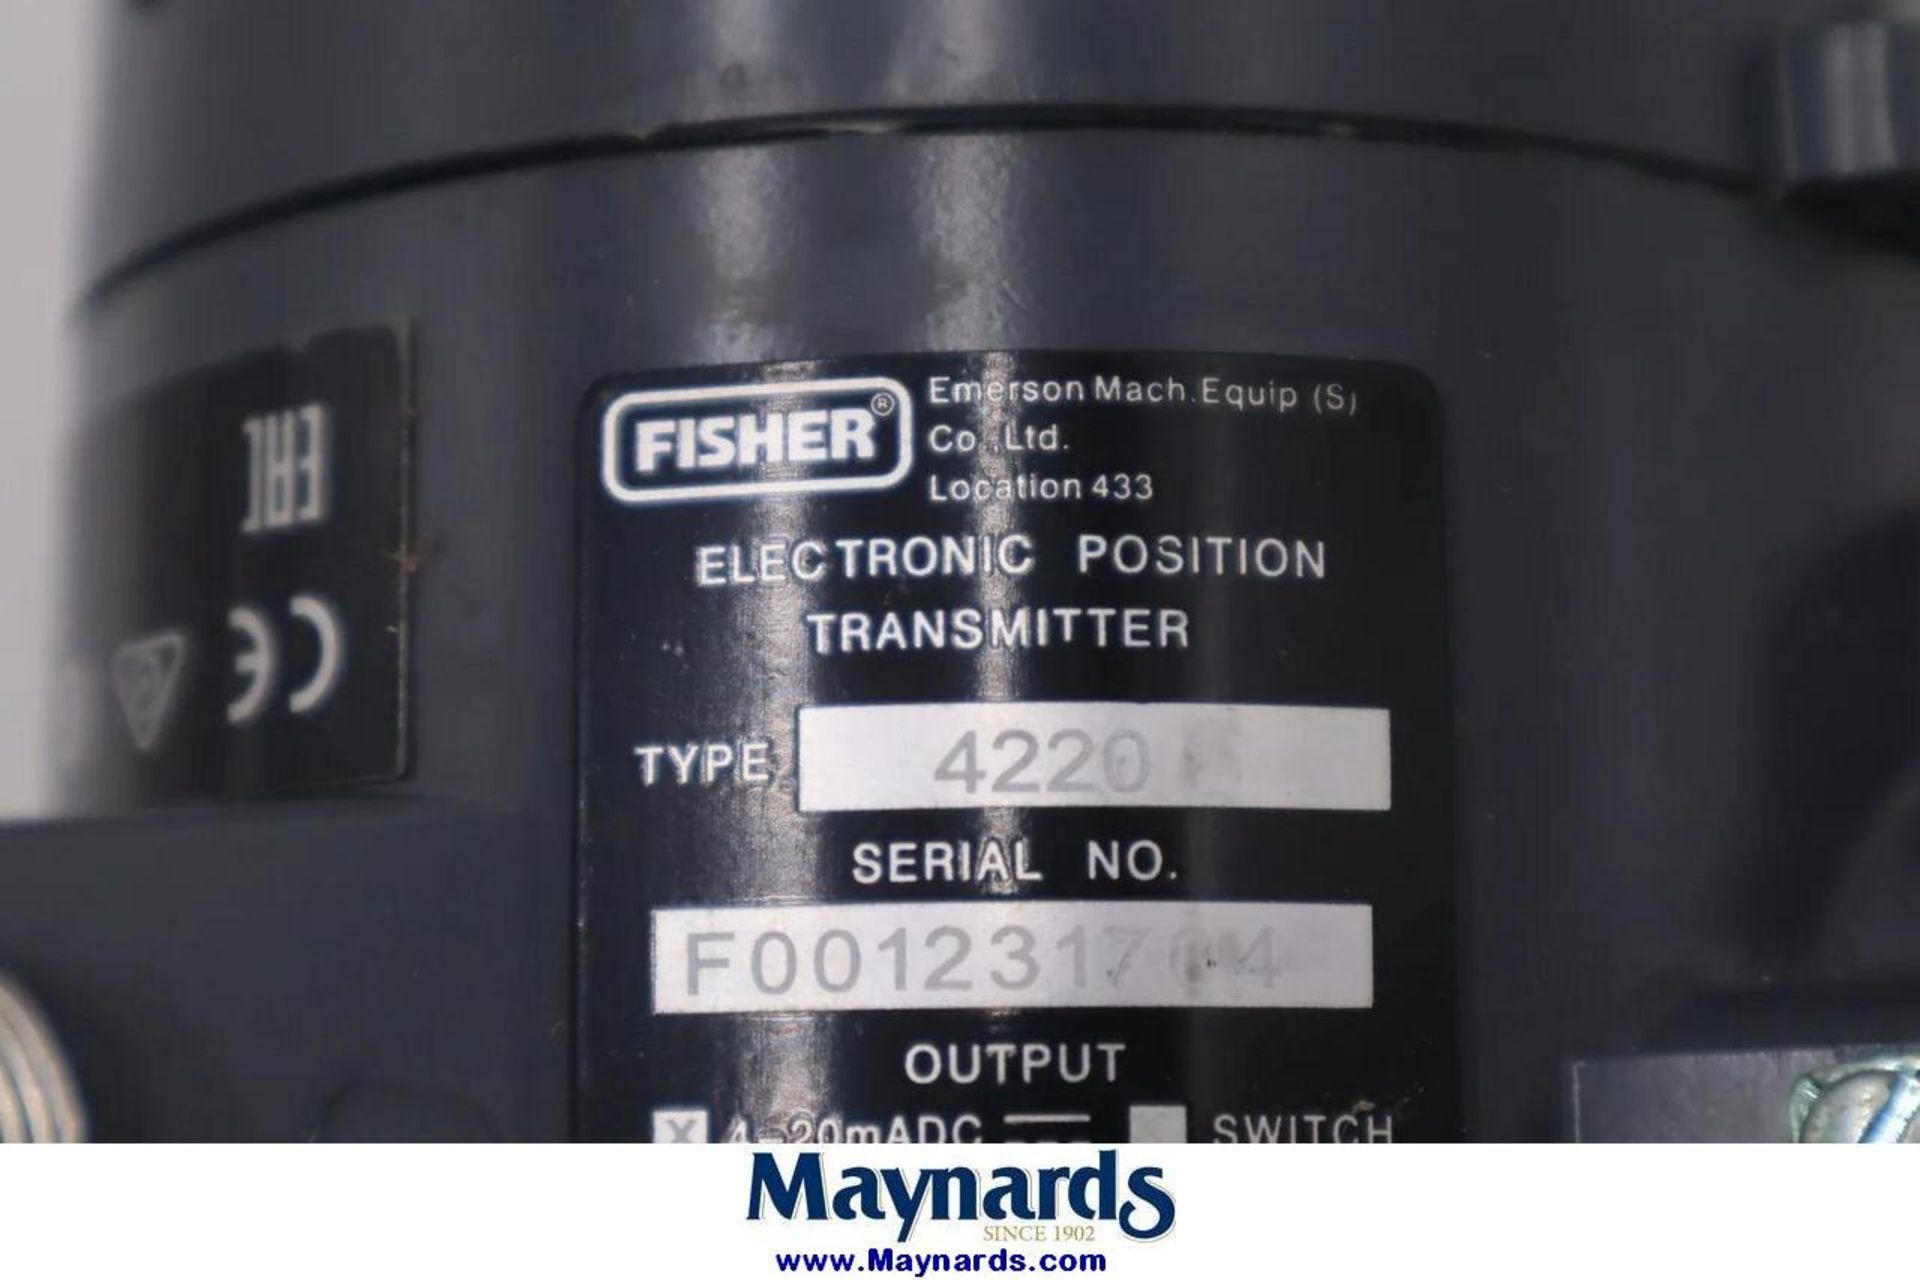 Fisher Emerson 4220 4200-305-24292 Electronic Position Transmitter - Image 2 of 3